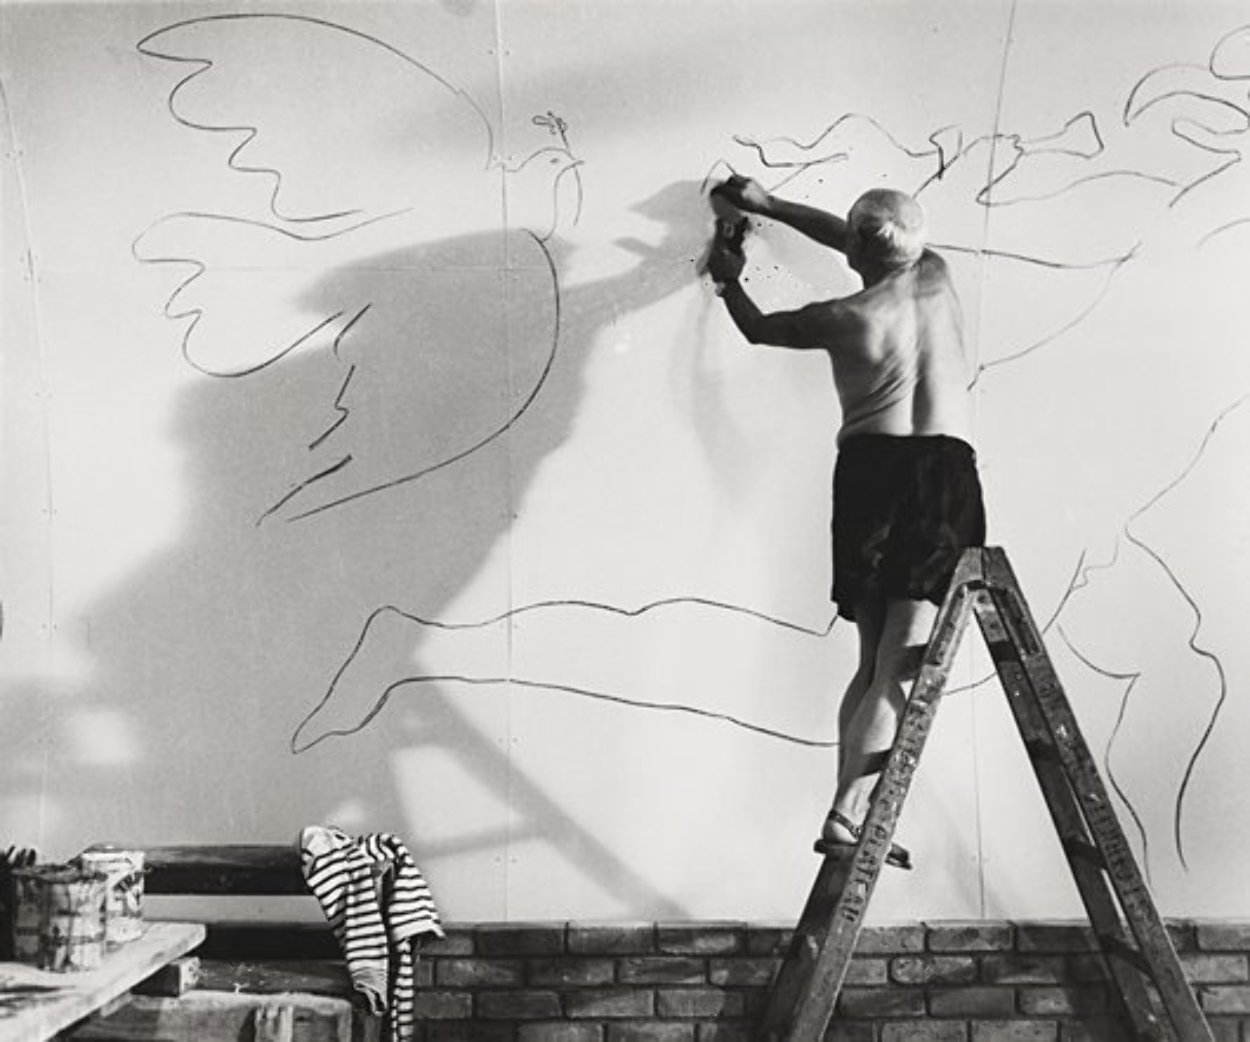 Picasso Working on the Fresco For the Film By Luciano Emmer, CA III 1953 HS Photography by Andre Villers